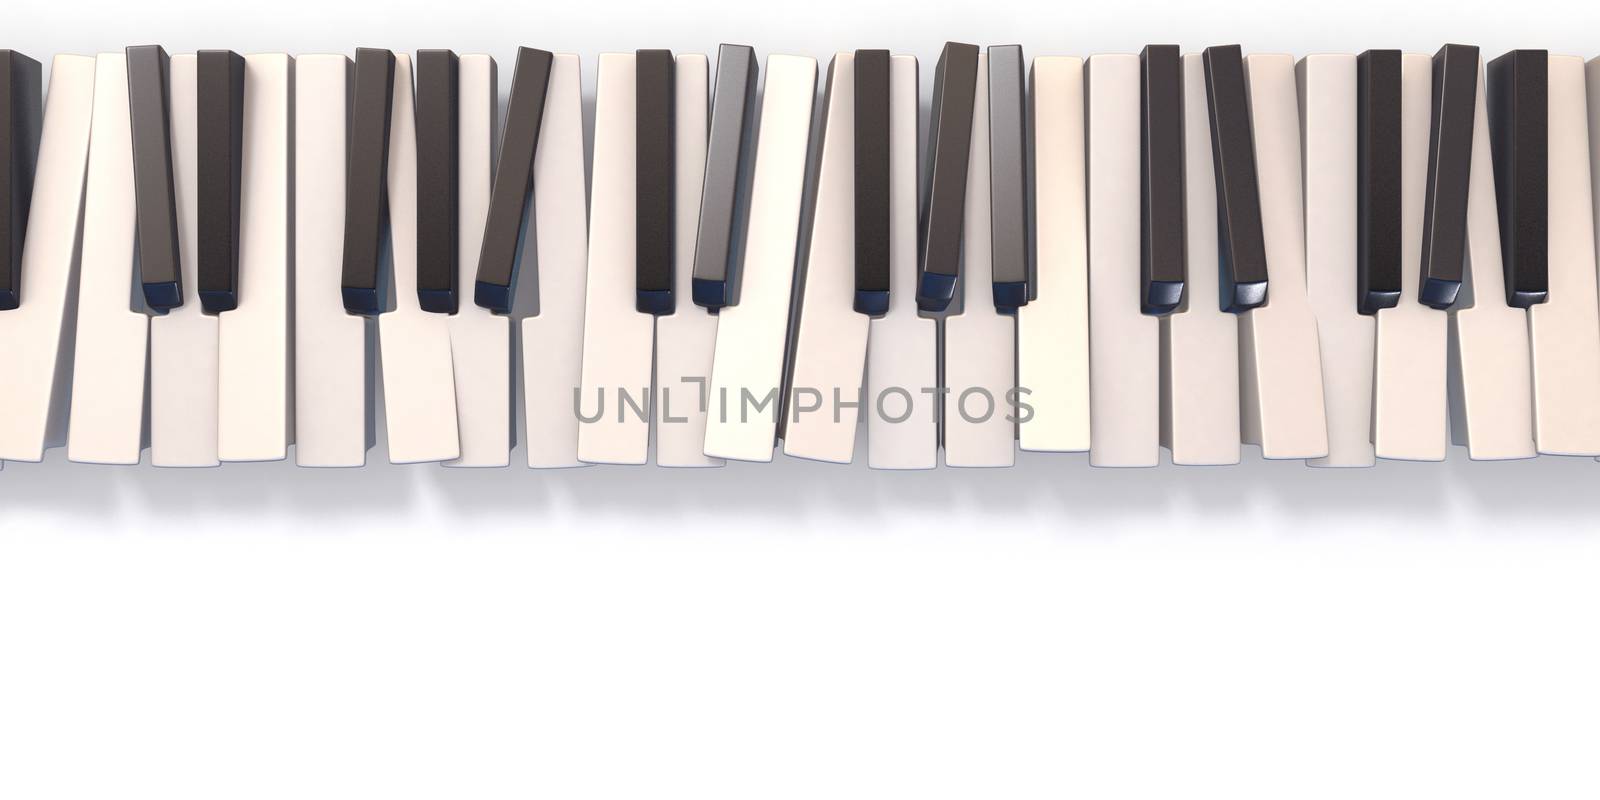 Unordered abstract piano keyboard 3D render illustration isolated on white background.